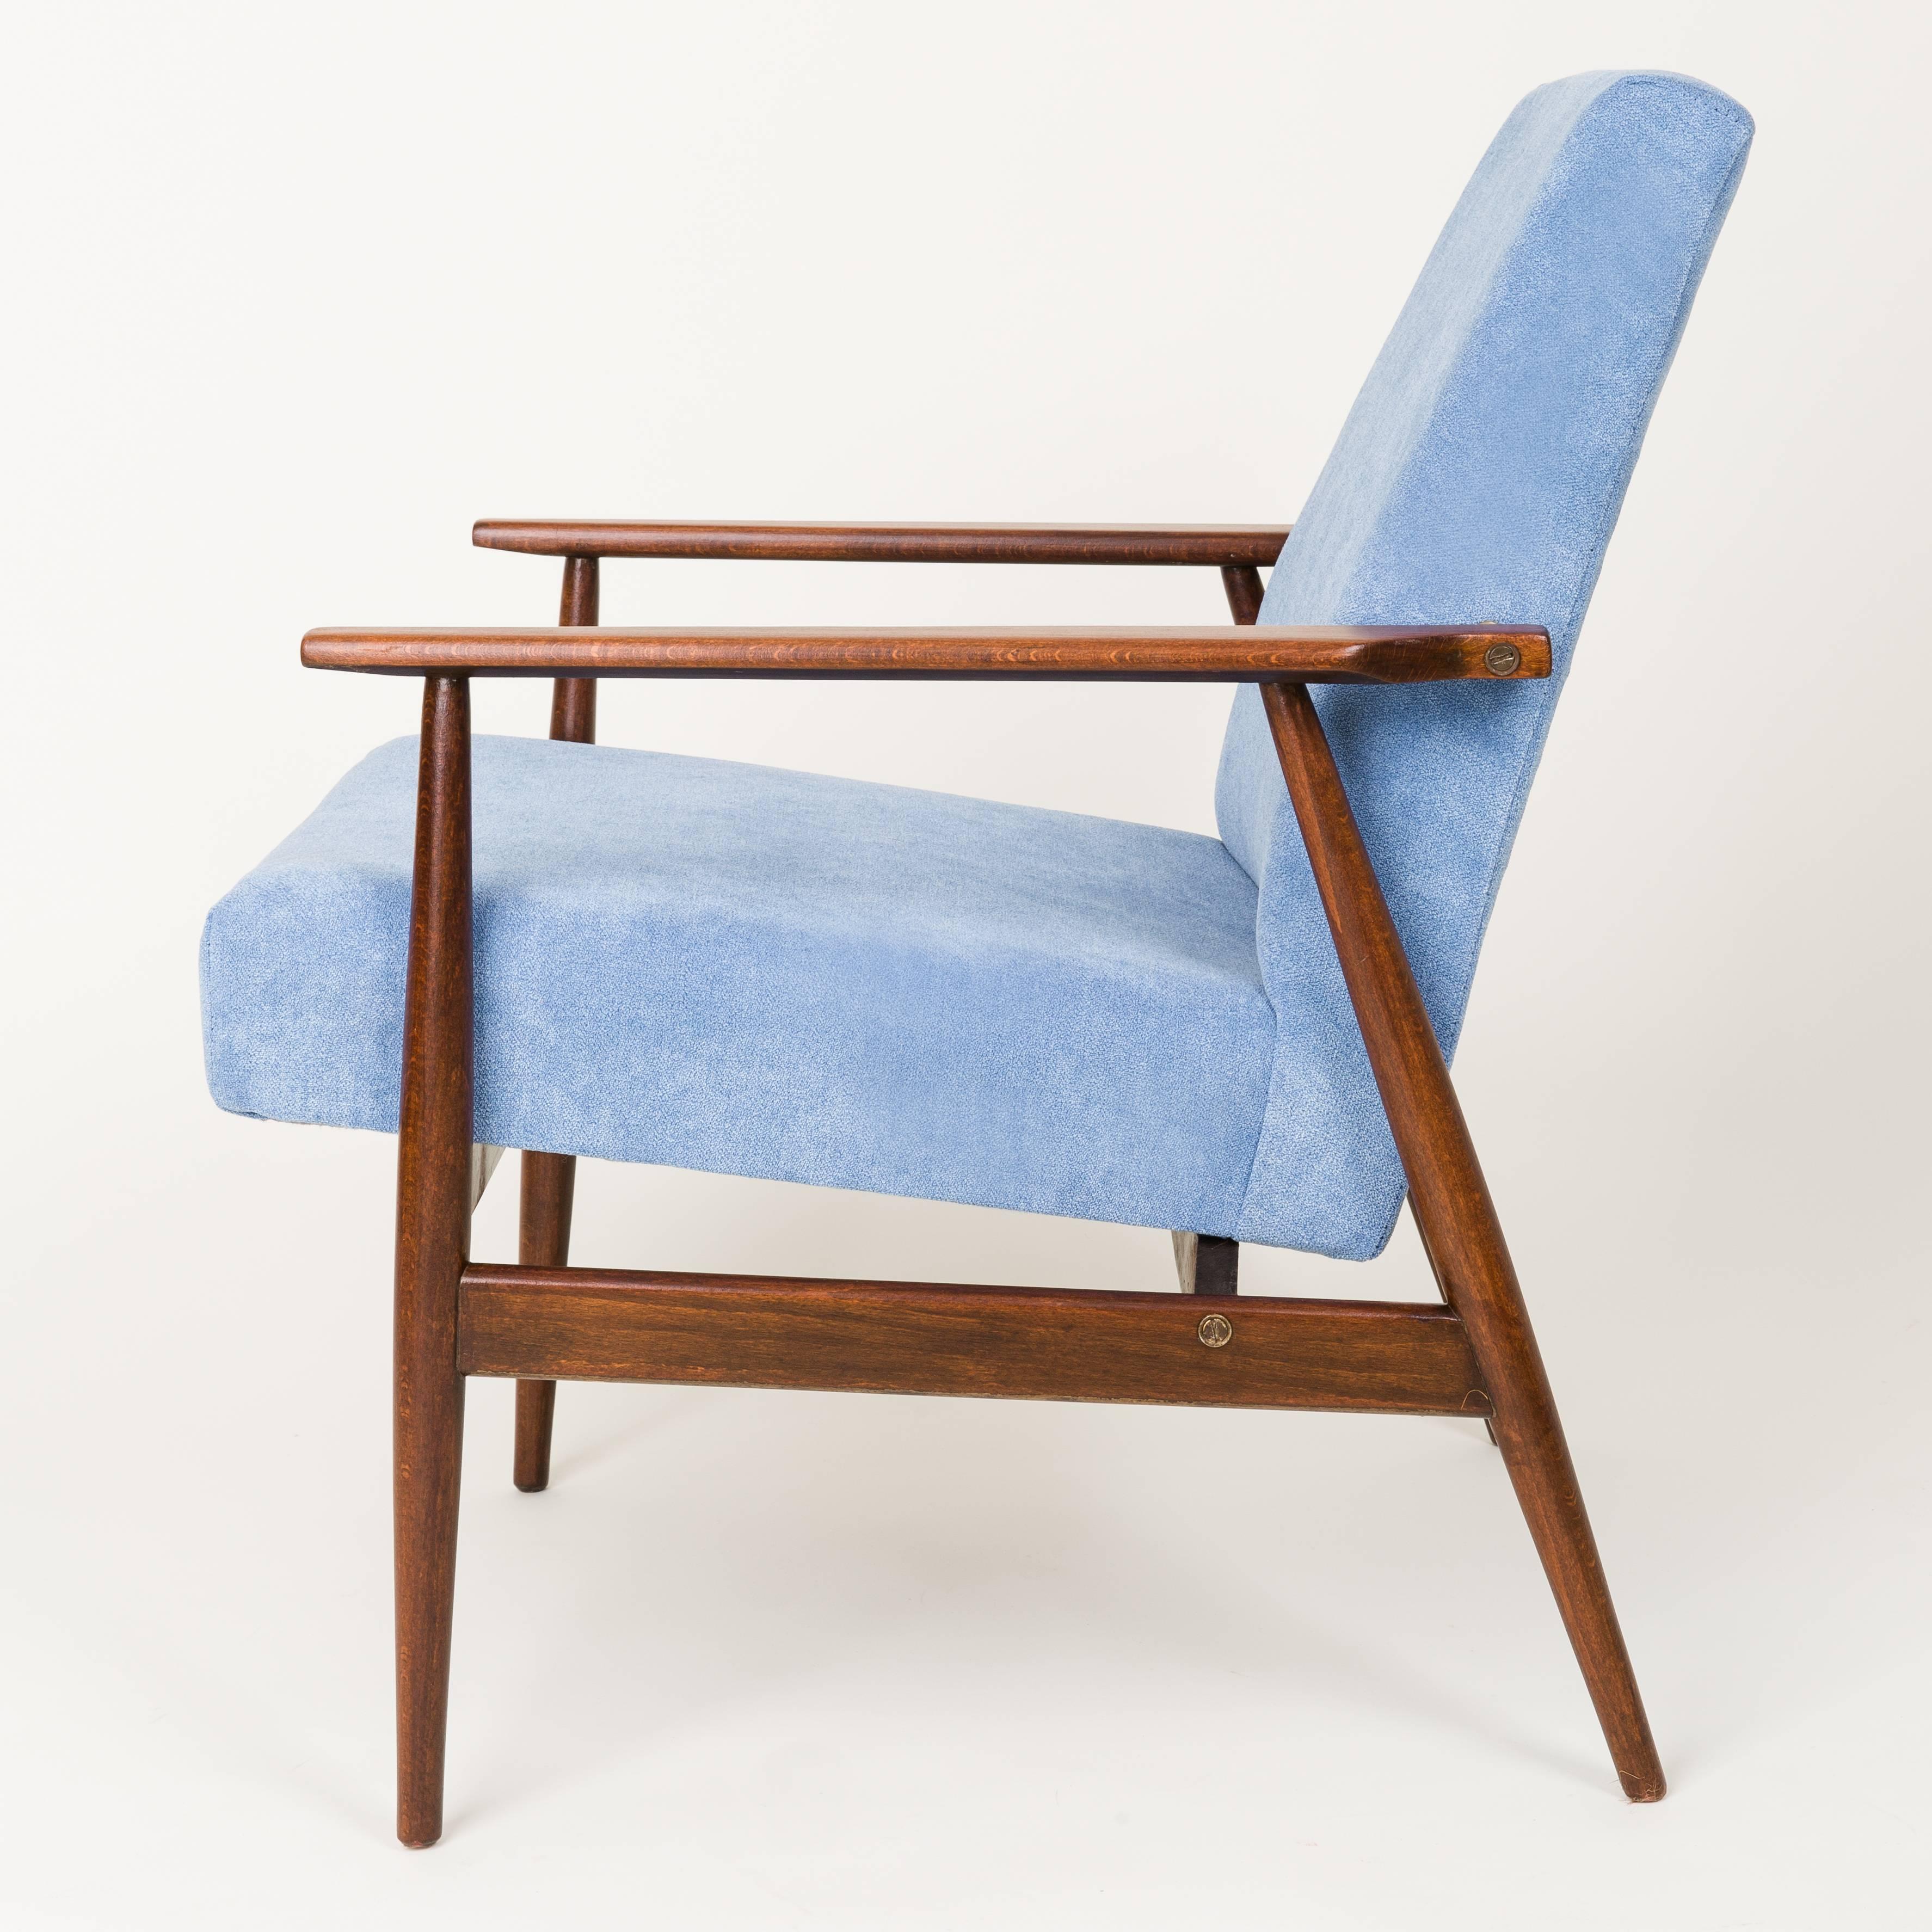 Hand-Crafted 20th Century Baby Blue Dante Armchair, H. Lis, 1960s For Sale